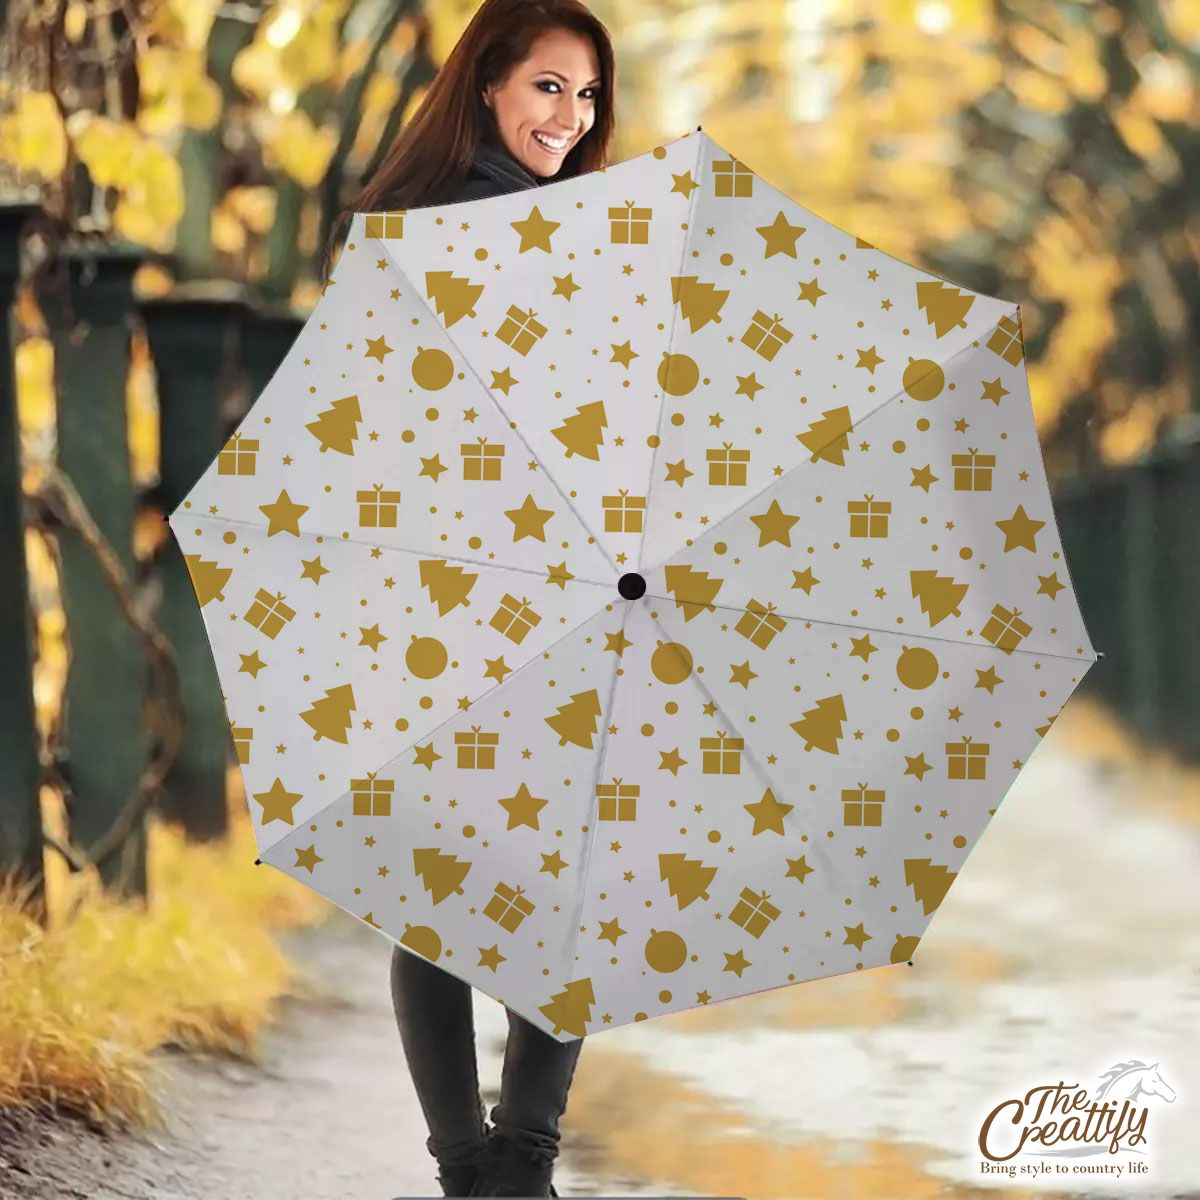 Christmas Gifts, Baudles And Pine Tree Silhouette Filled In Gold Color Pattern Umbrella